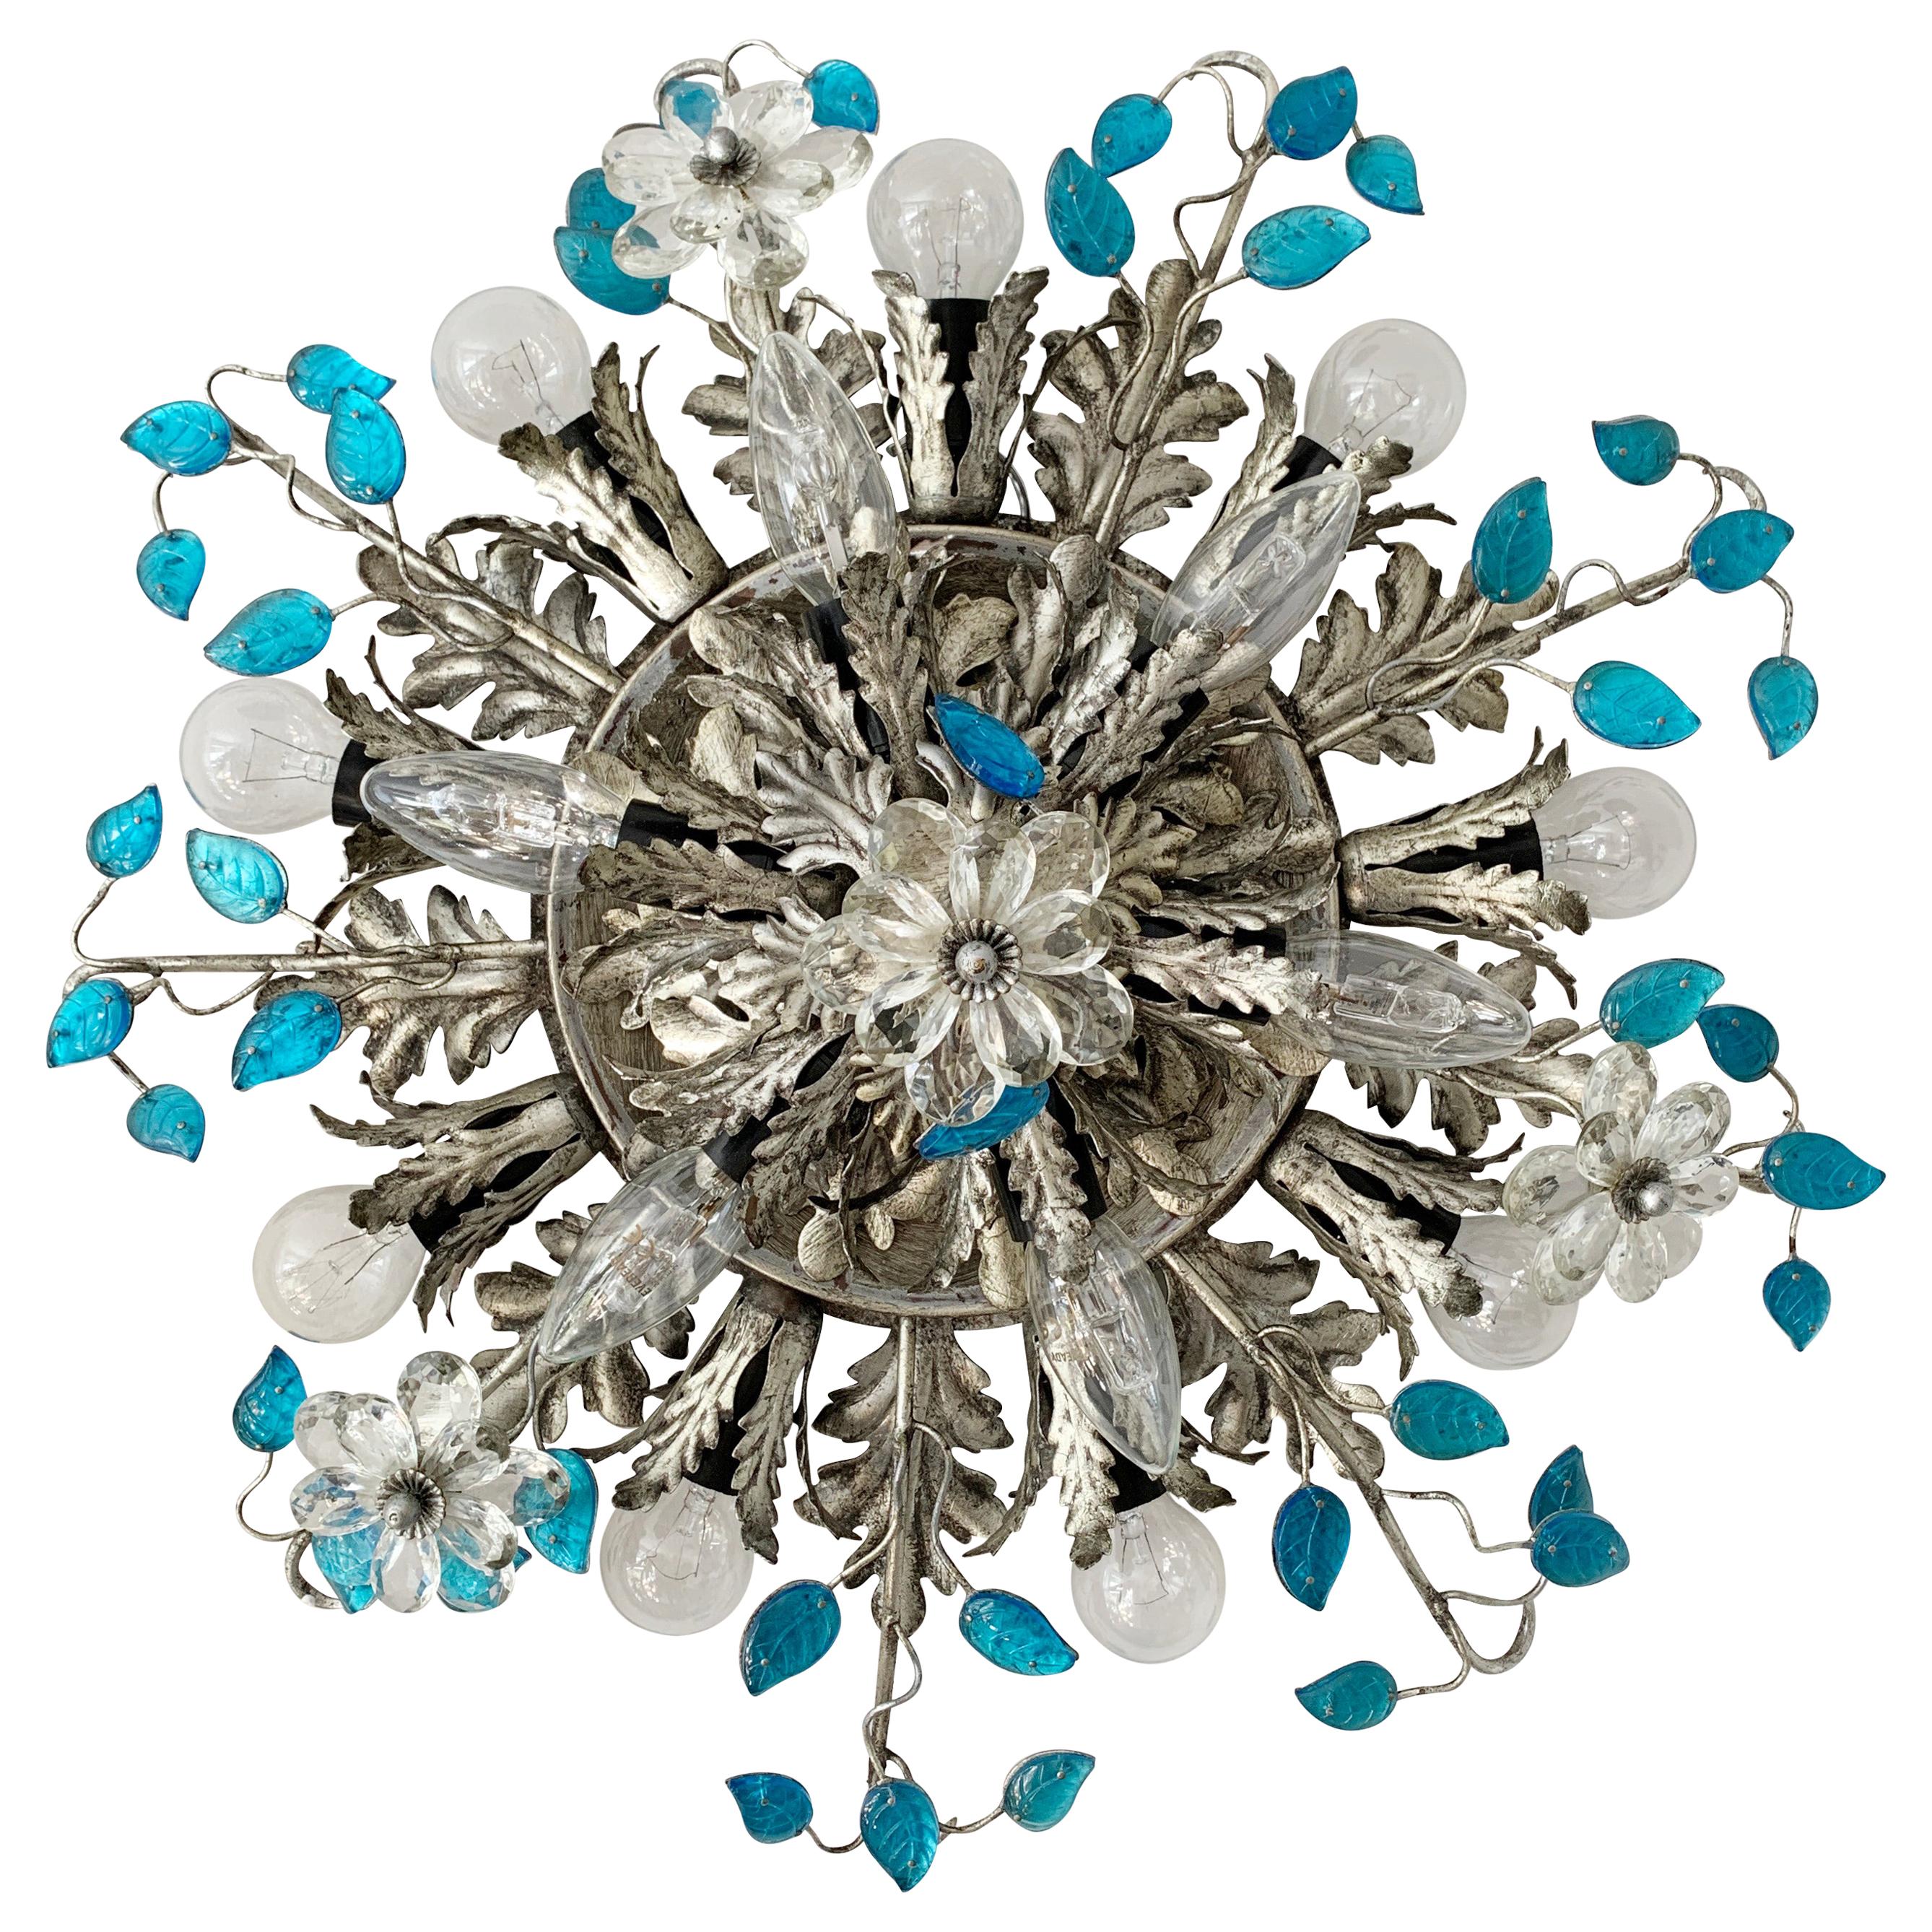 Banci Firenze Silver Florentine Ceiling Light with Murano Glass Flowers